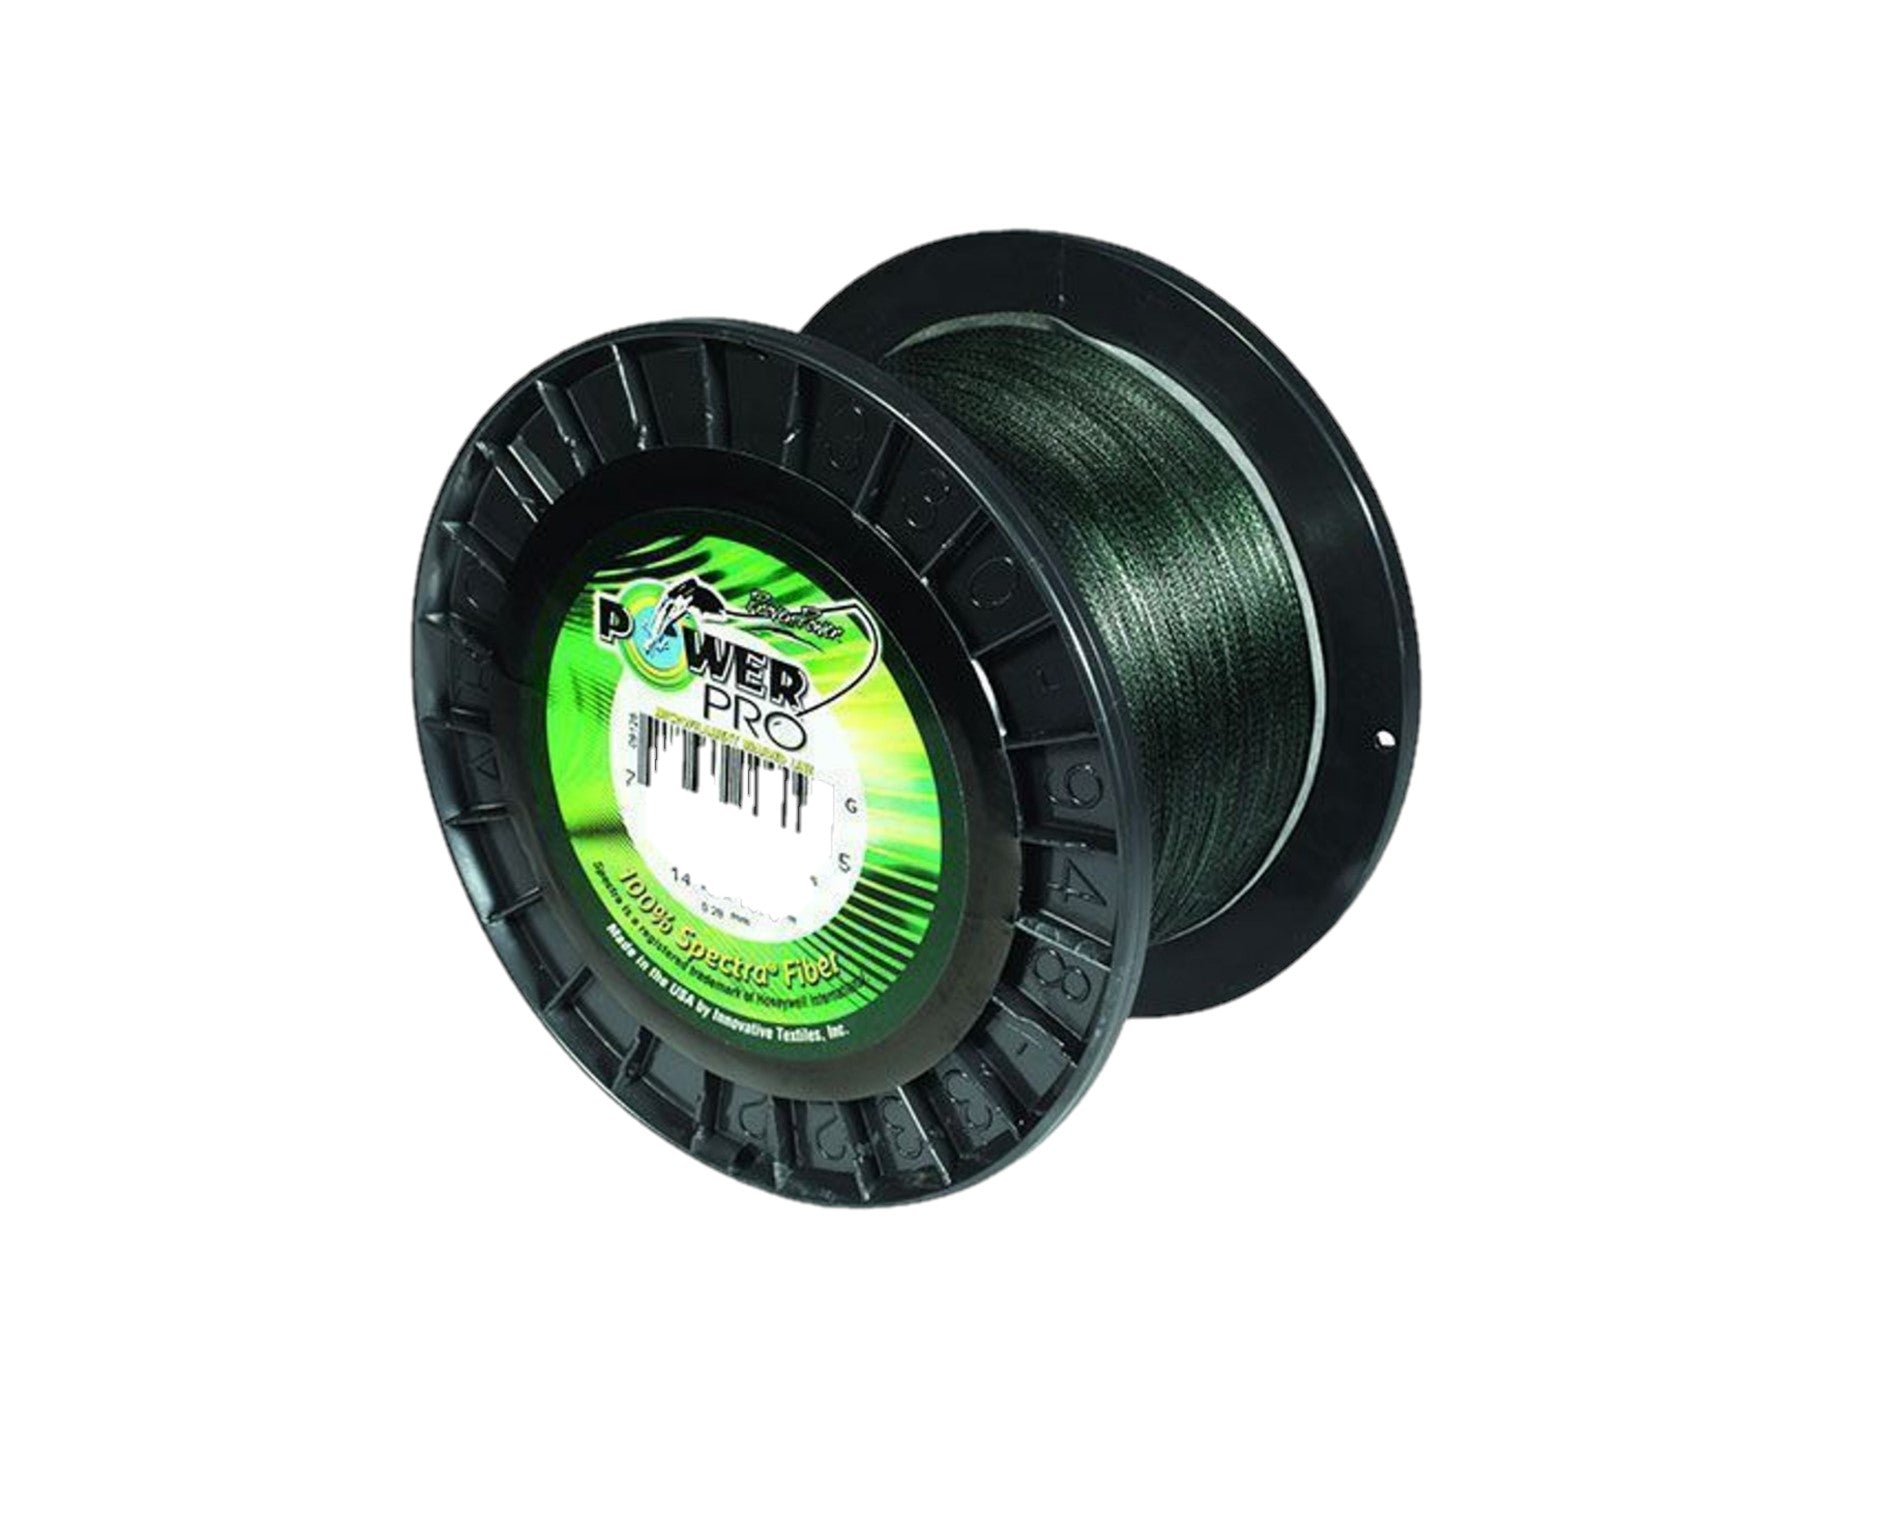 Braided Line 10lb 150 yrd - SPOOLED ONLY with purchase of reel